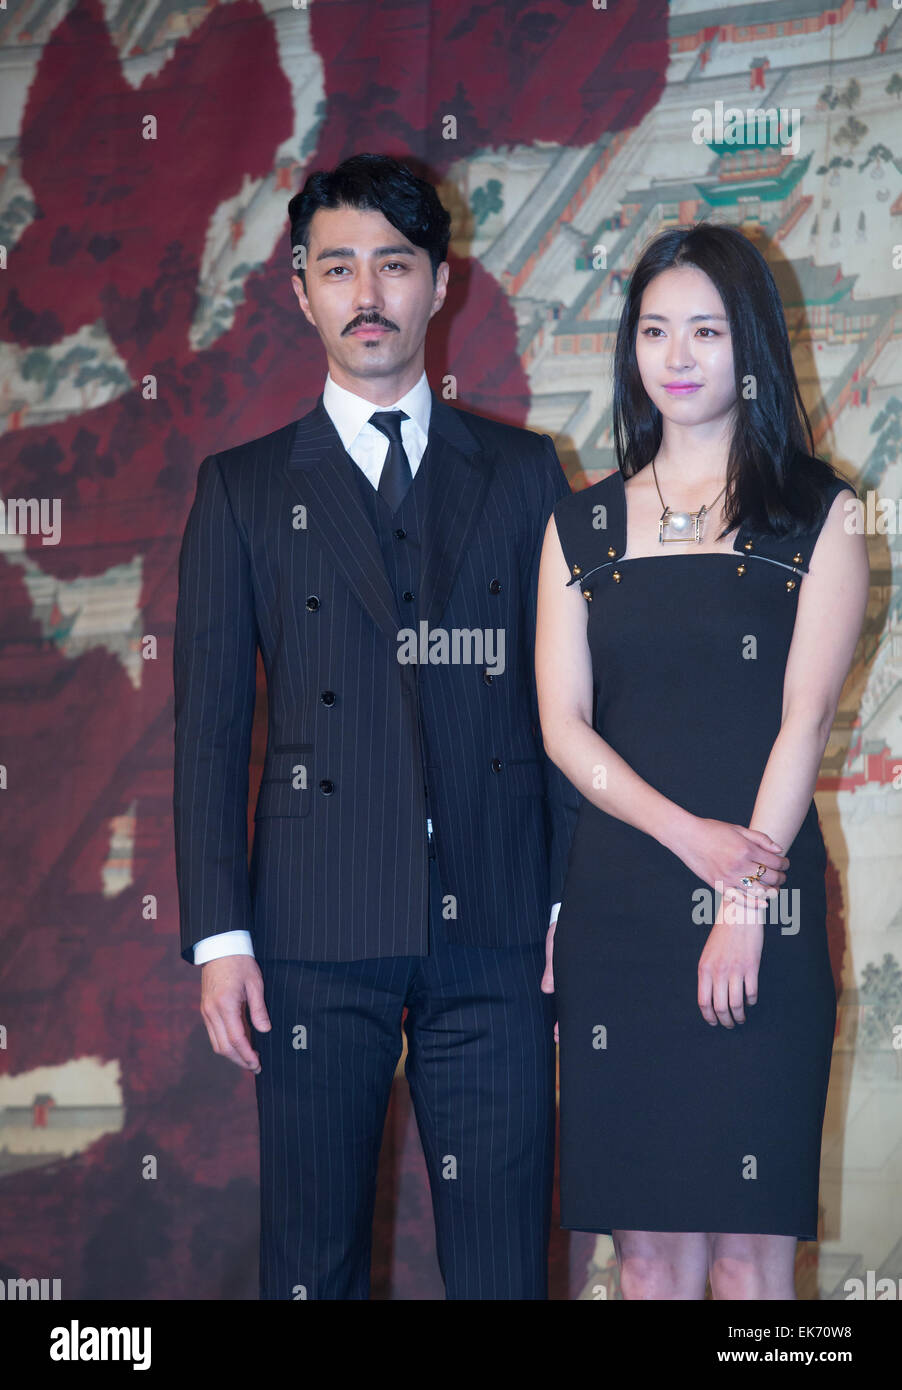 Cha Seung-Won and Lee Yeon-Hee, Apr 07, 2015 : South Korean actor Cha Seung-won (L) and actress Lee Yeon-hee attend a press conference of MBC's new drama, Splendid Politics, in Seoul, South Korea. © Lee Jae-Won/AFLO/Alamy Live News Stock Photo